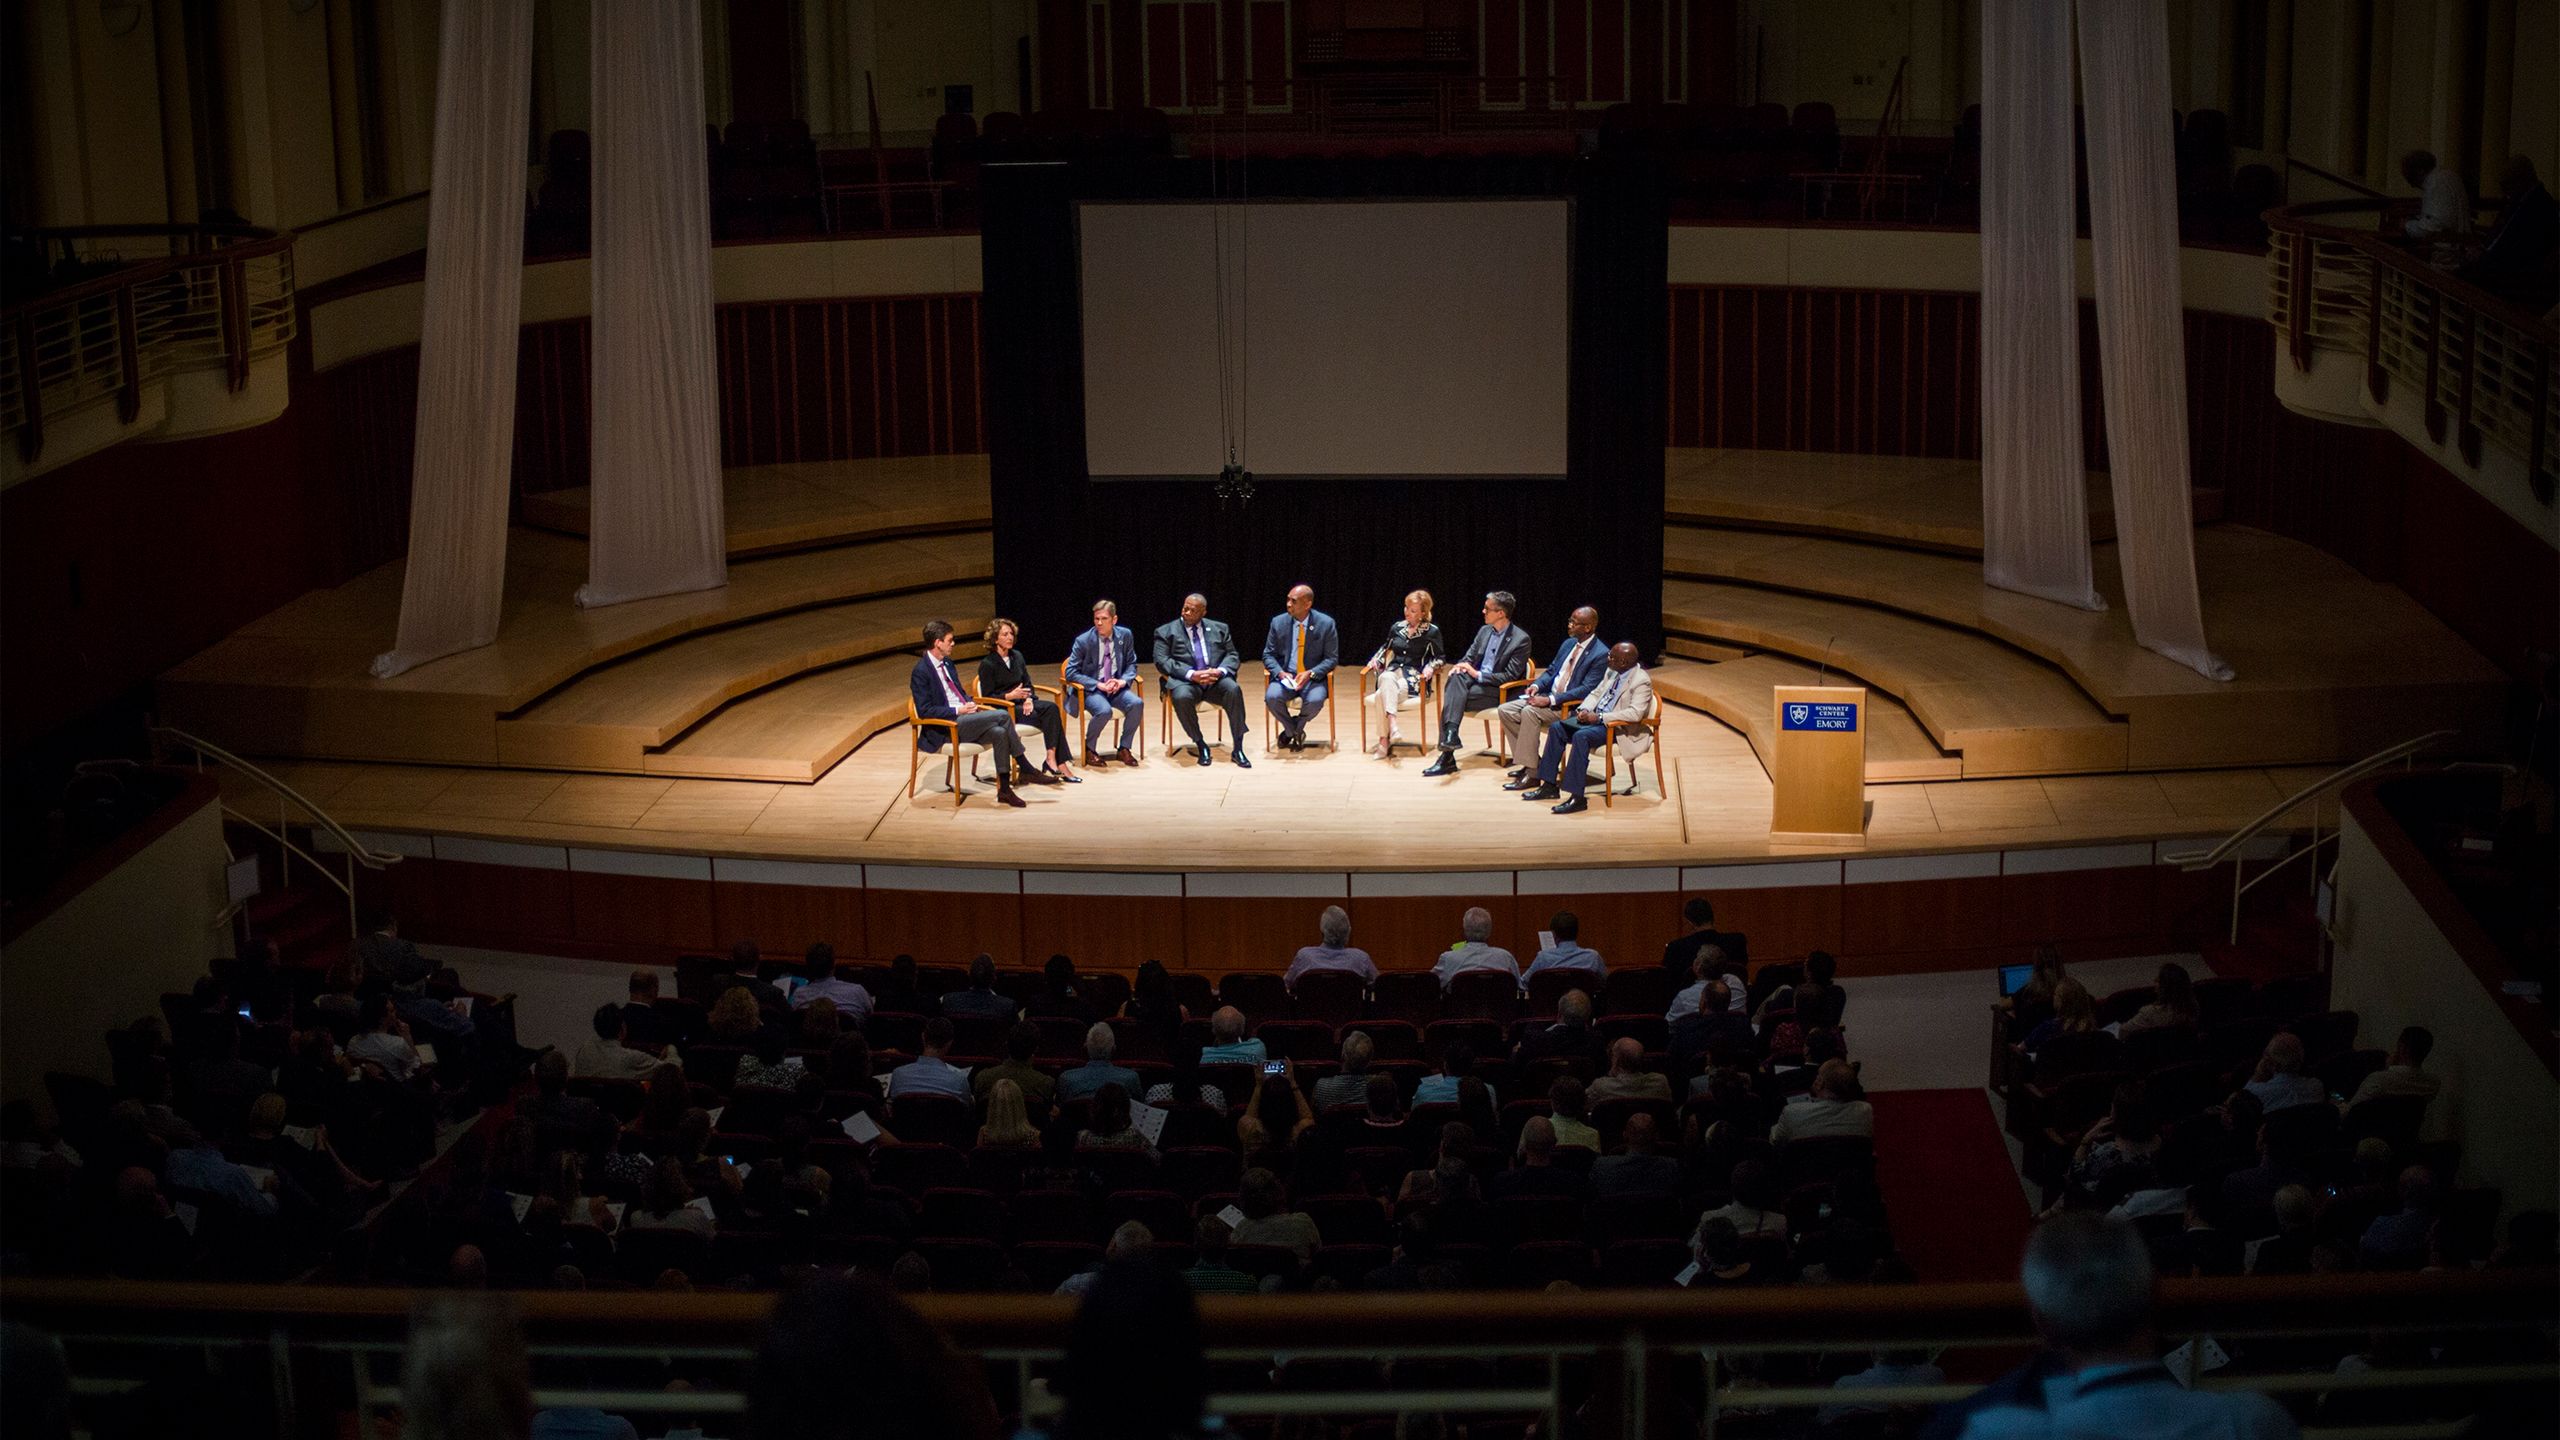 Eight Emory faculty and Provost McBride sit in a half-circle of chairs on the stage of the Schwartz Center for Performing Arts.